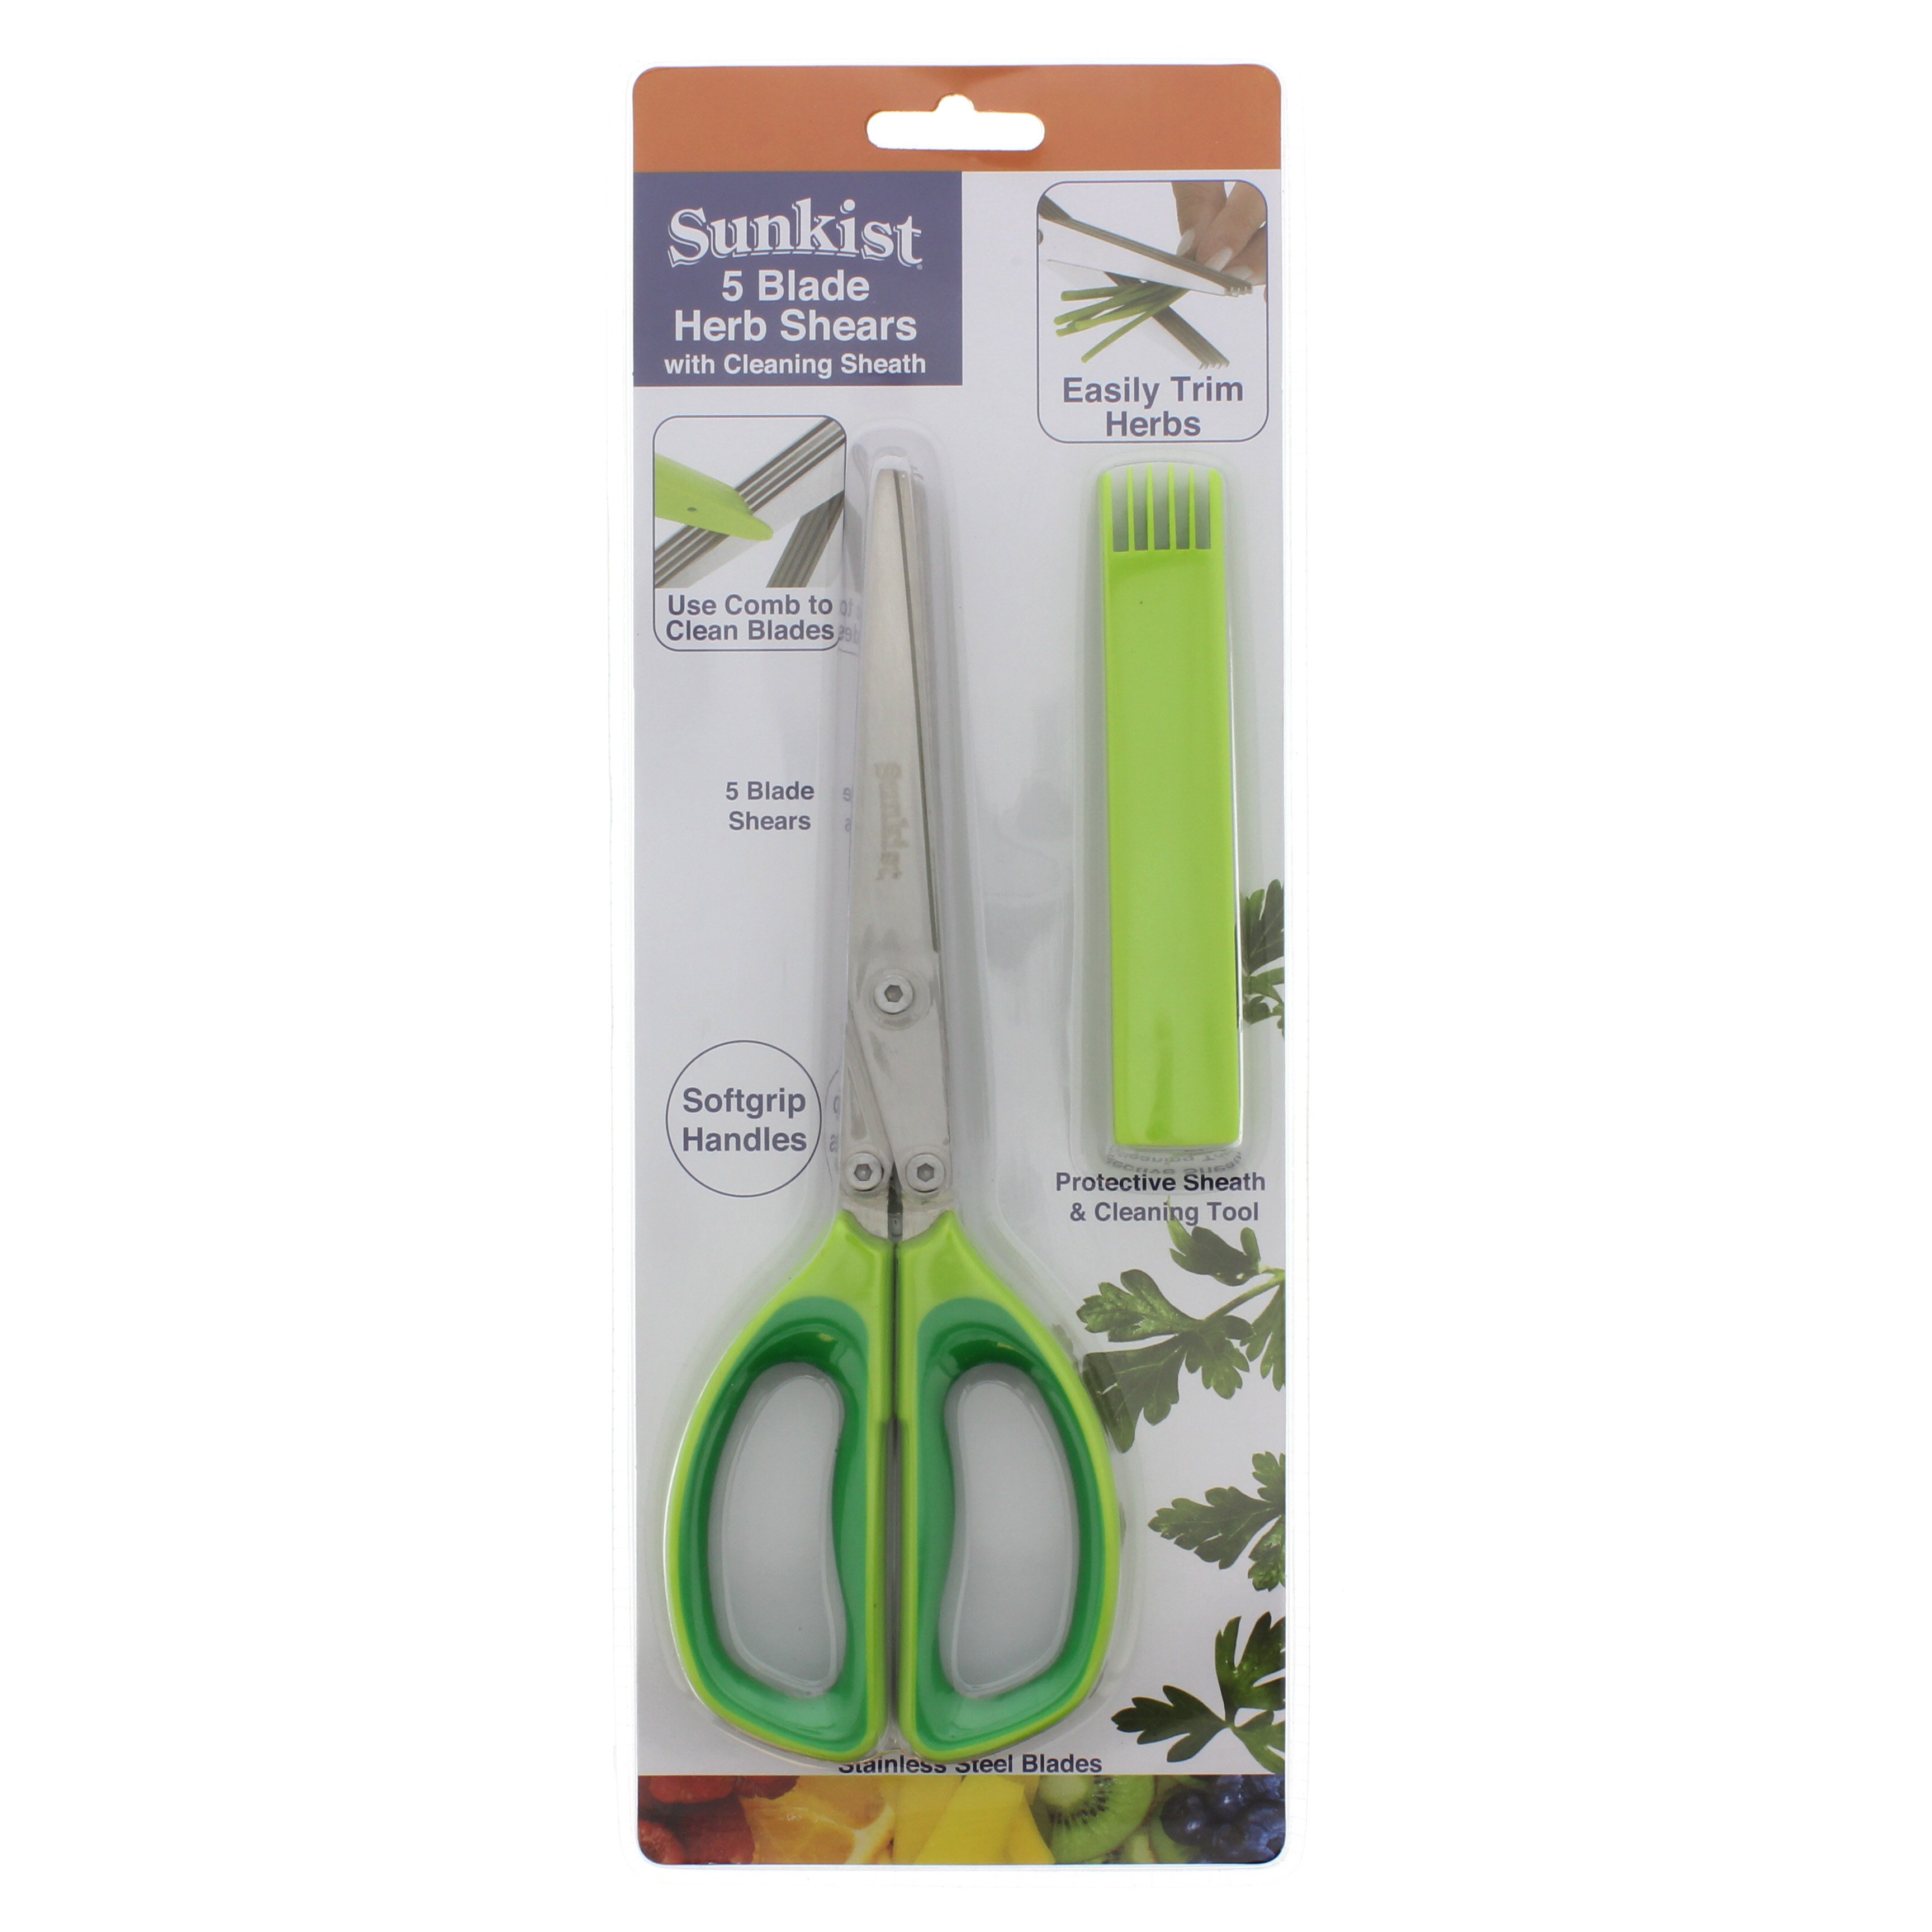 Sunkist 5 Blade Herb Shears With Sheath and Blade Cleaner - Shop Kitchen  Shears at H-E-B